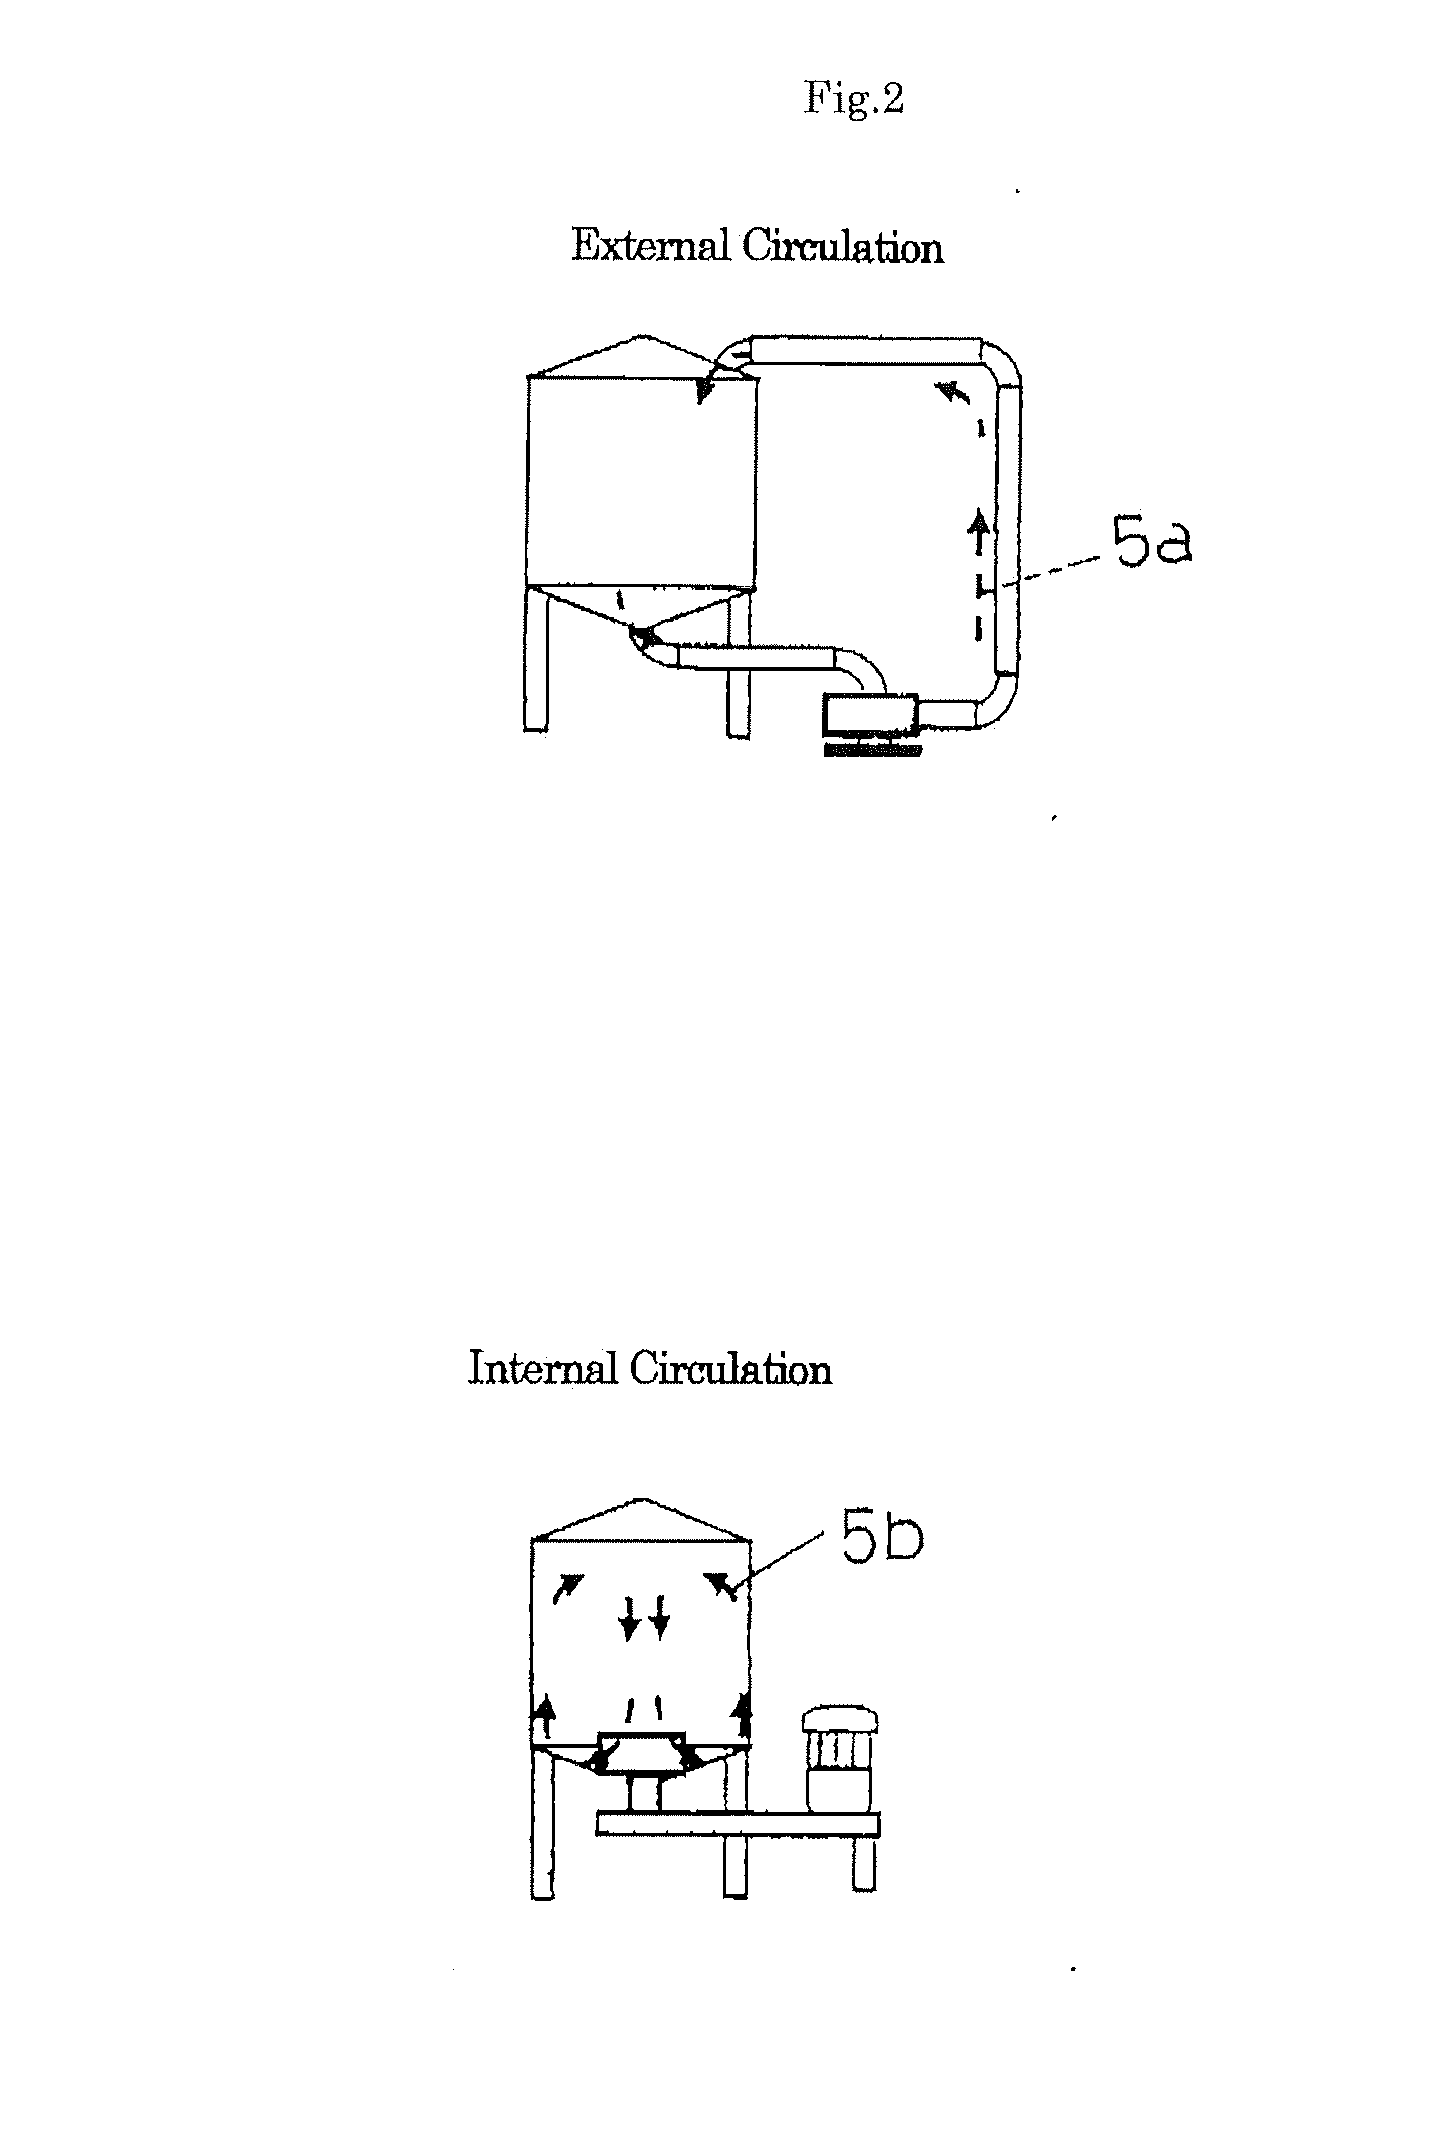 Particle size breakup apparatus